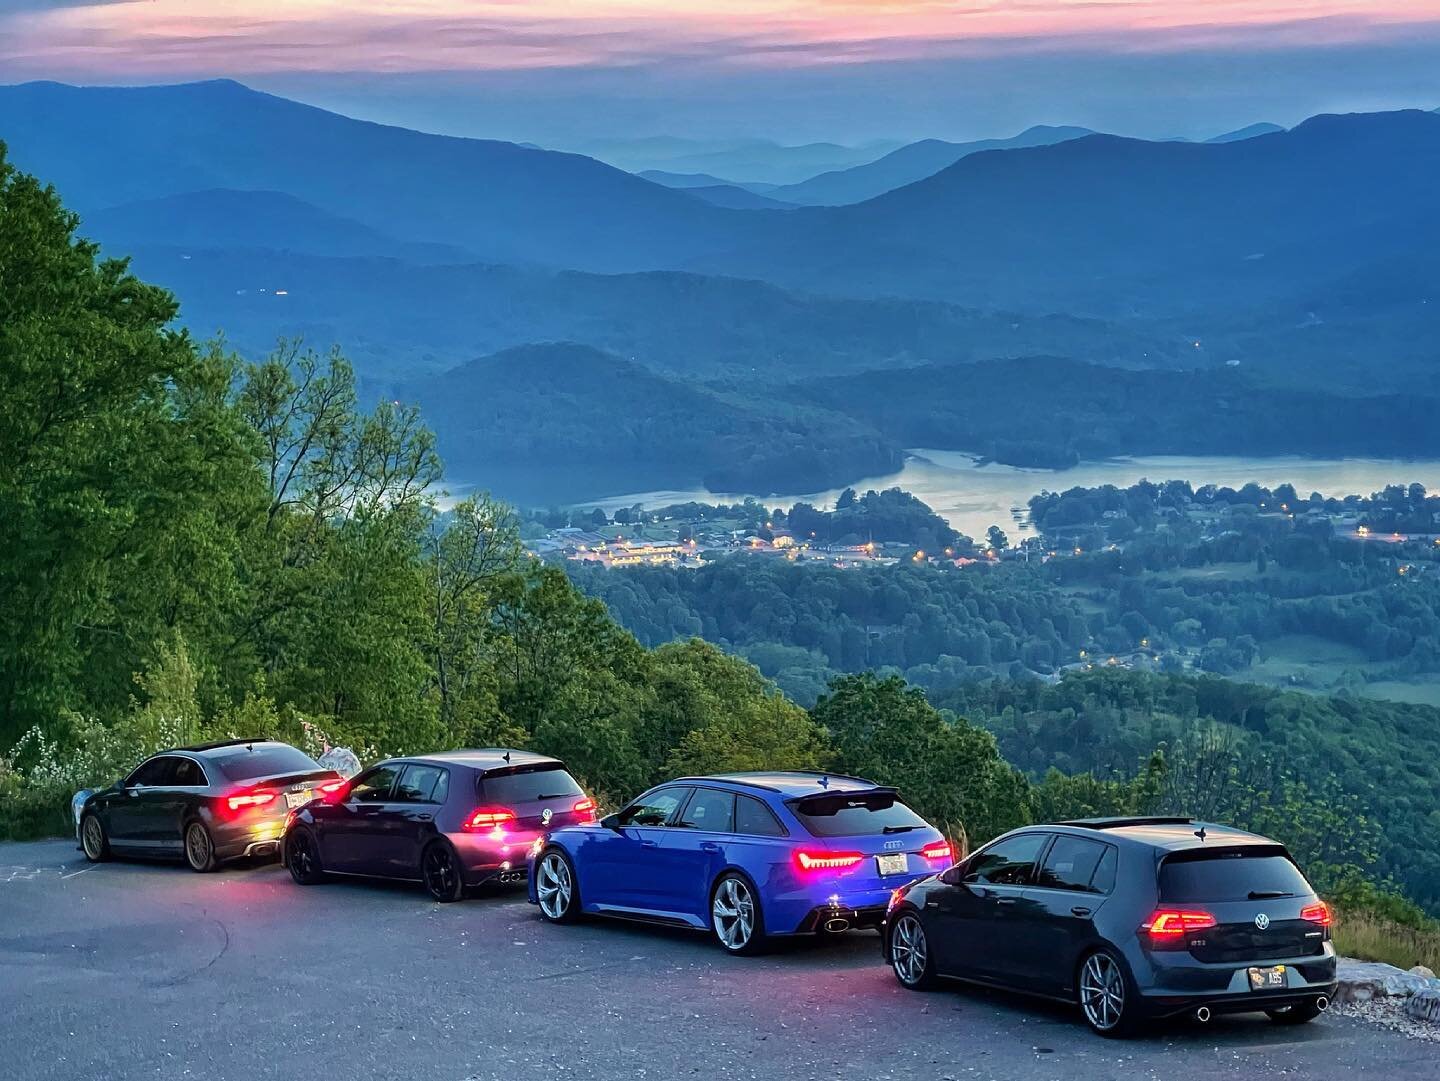 Still not over the incredible views and driving roads from last night. One of the greatest automotive experiences I&rsquo;ve had to date. 

#AVF #AlpineVolksFair #AlpineVAGFair #EuroTripper #GTI #MK7 #MK7GTI #GTIMK7 #RS6 #RS3 #Audi